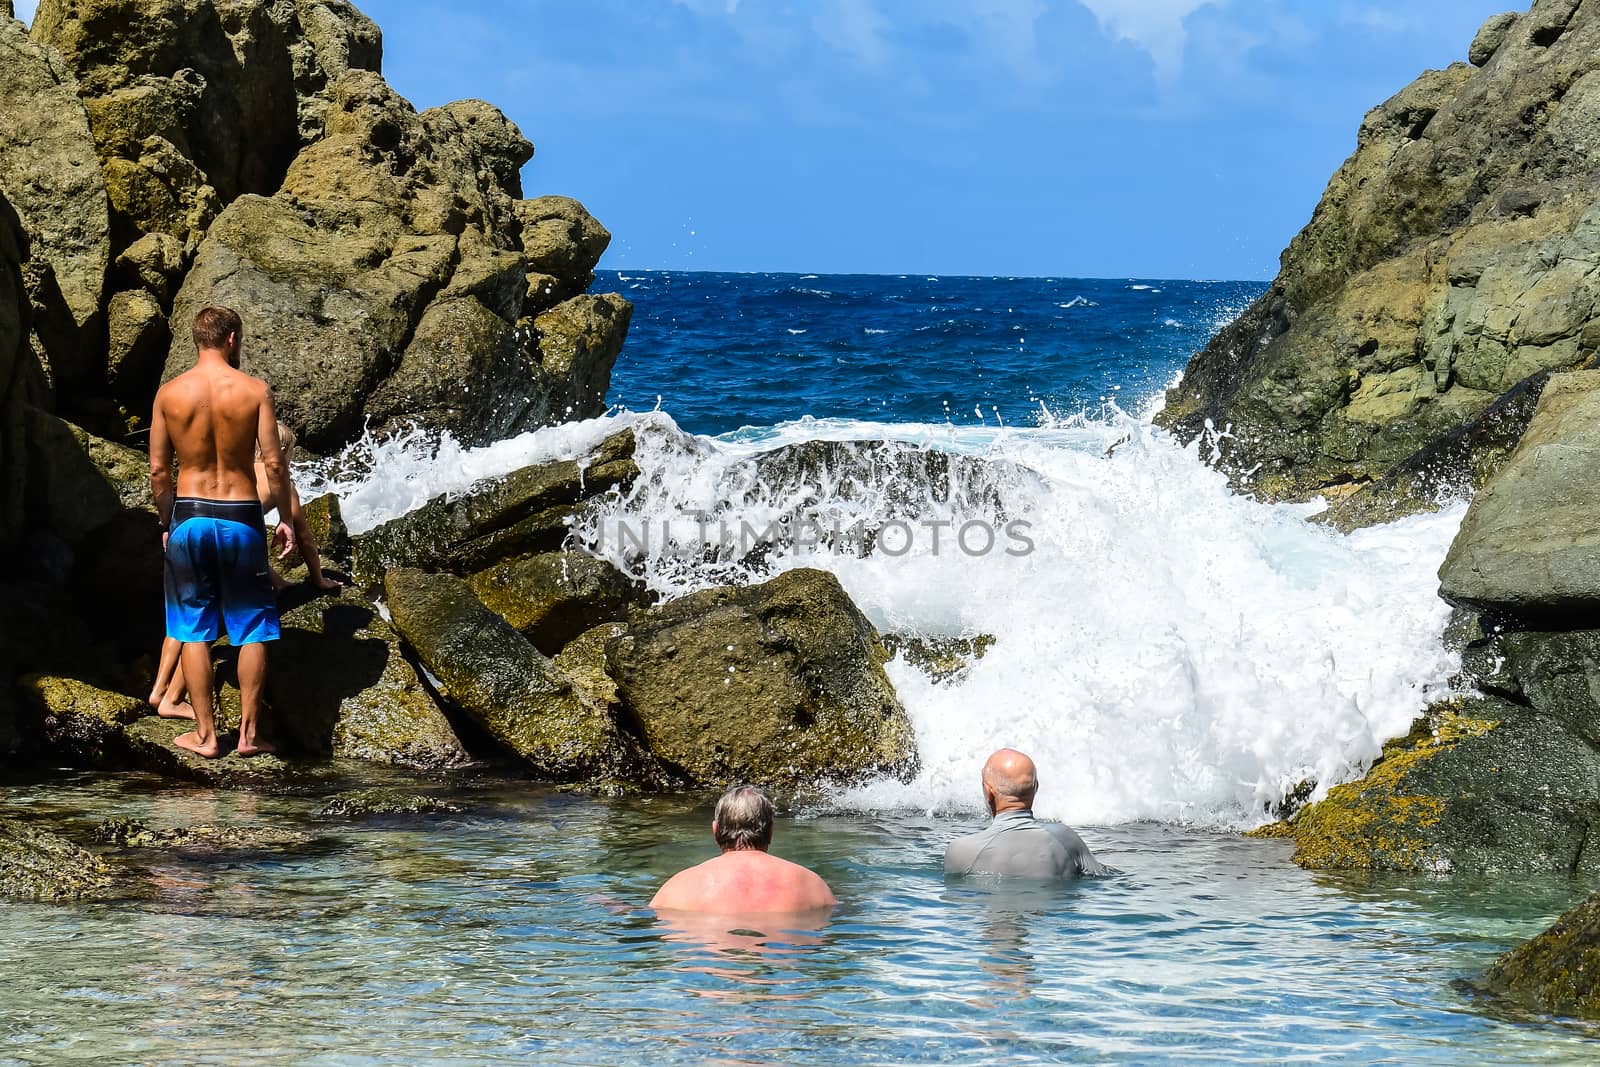 Bathers enjoying the surf rolling over the rocks in the Bubble Pool on Jost Van Dyke in the British Virgin Islands.